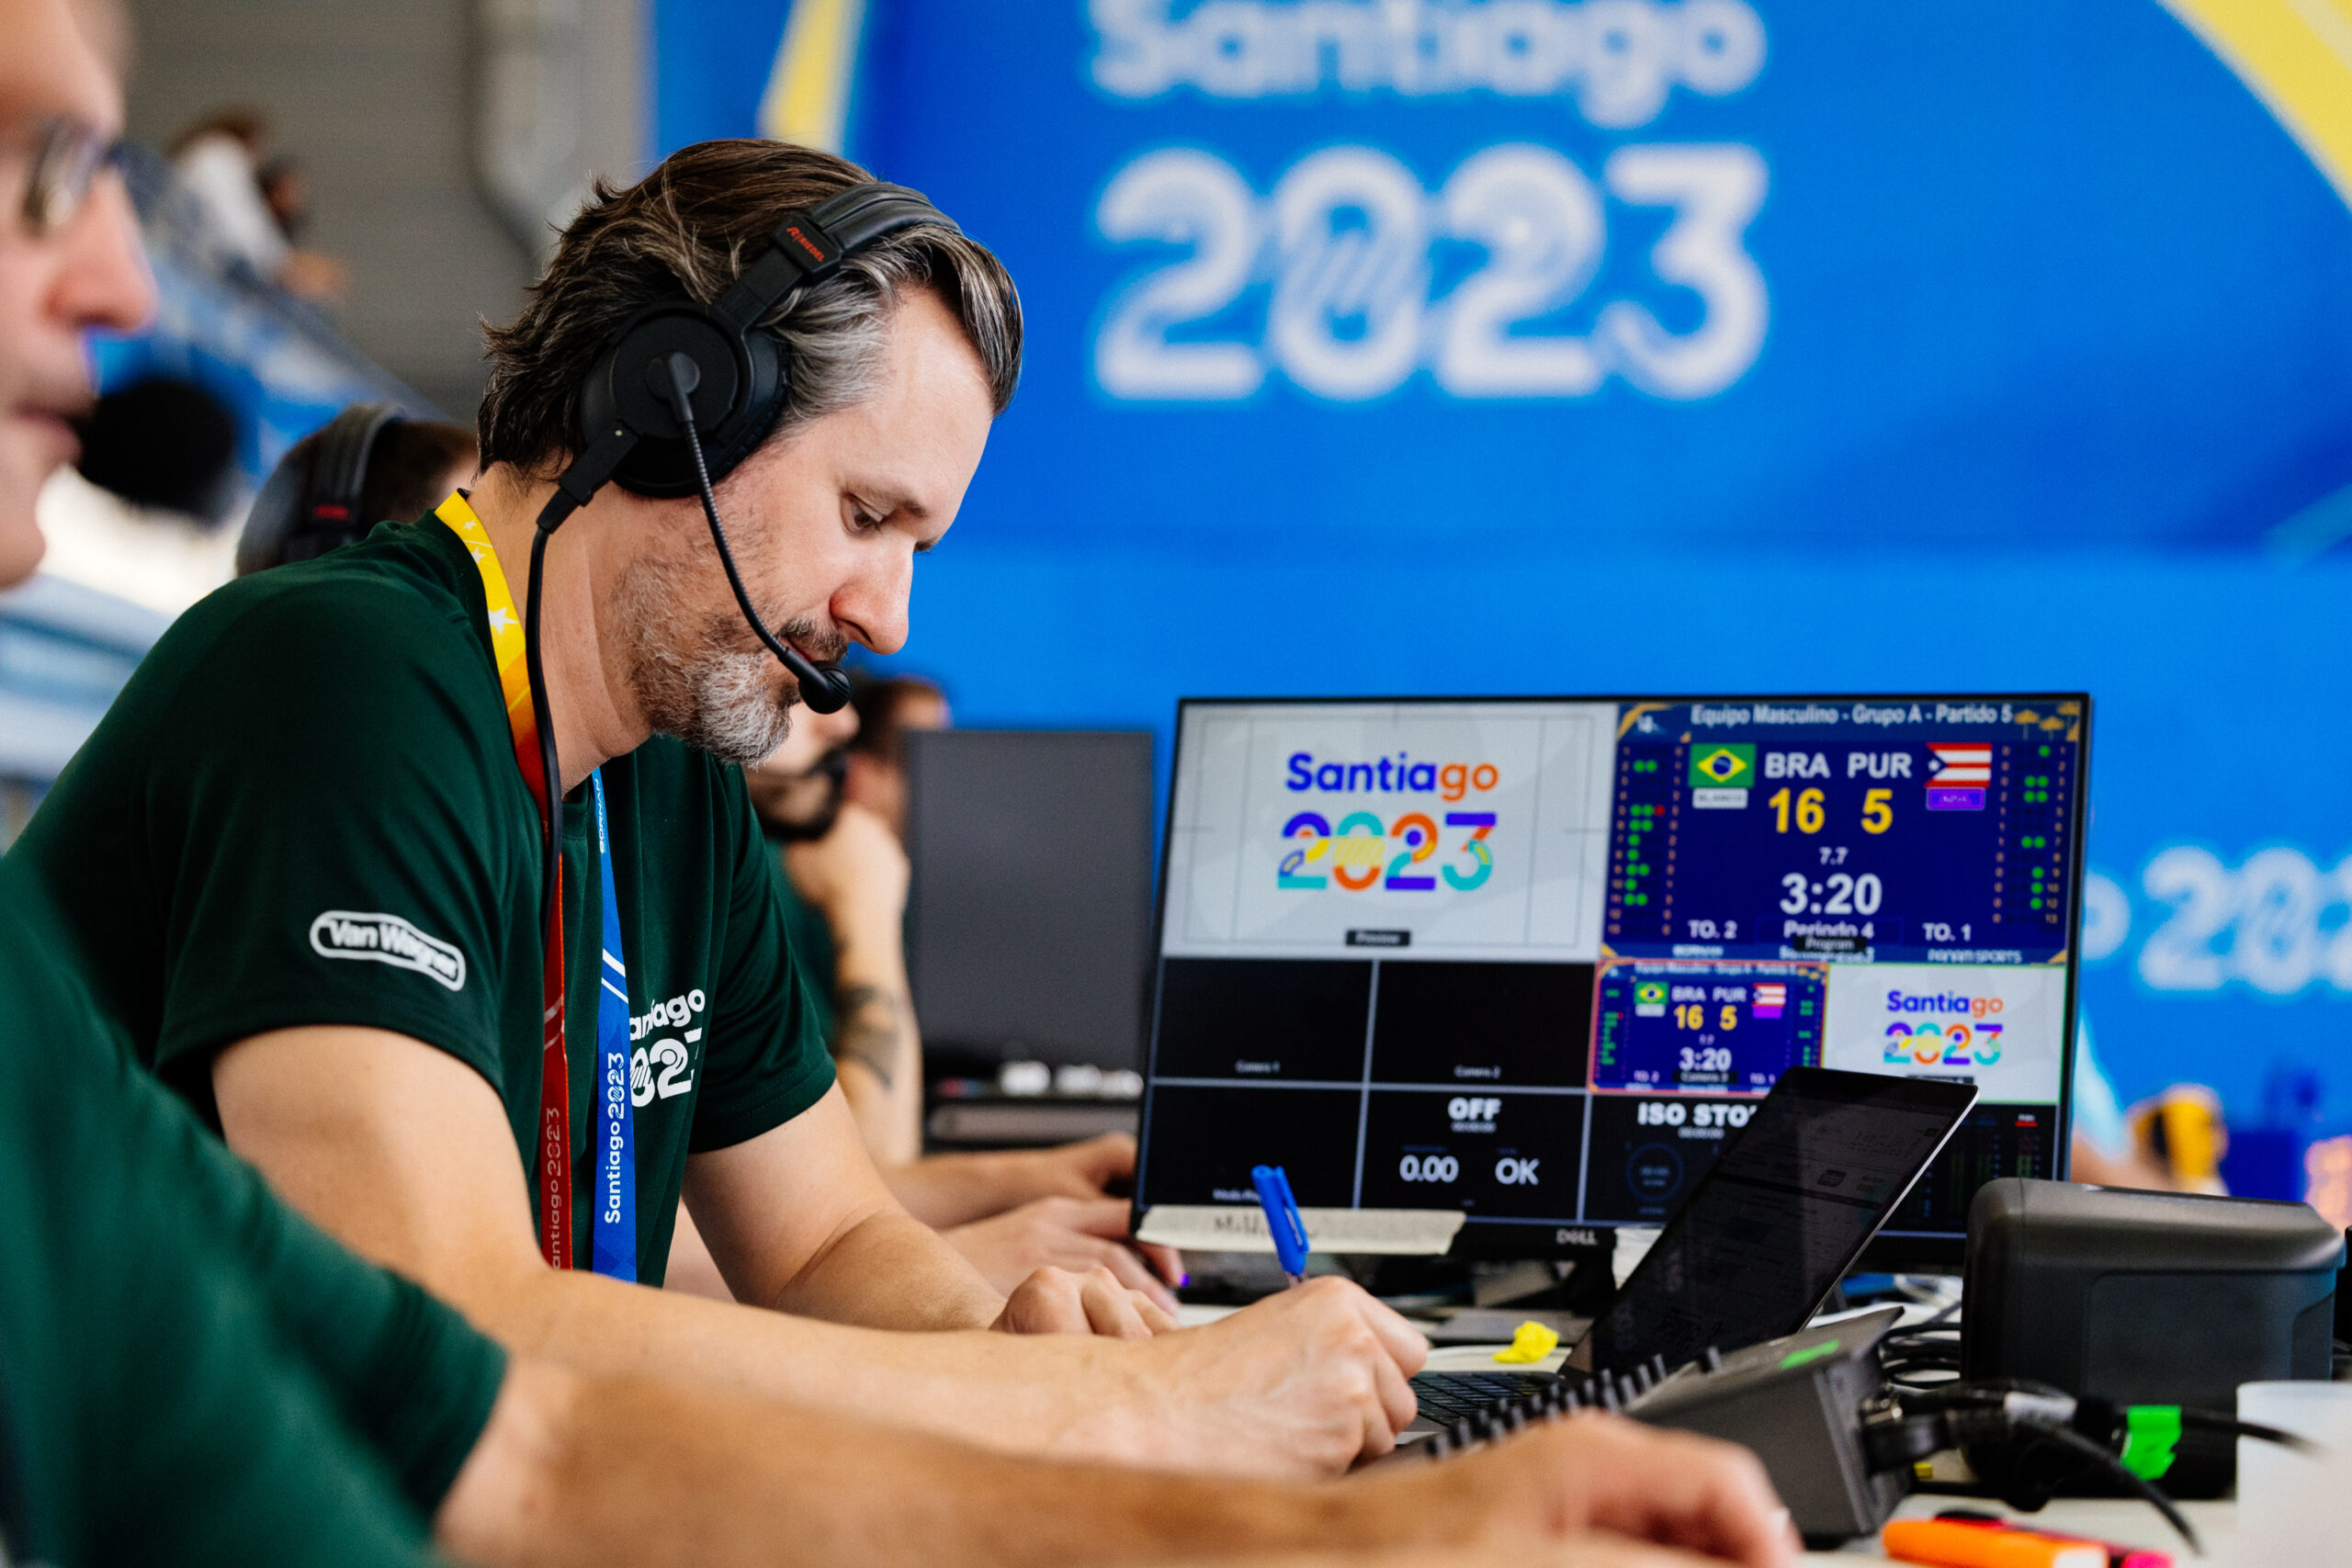 Van Wagner Productions’ Sport Presentation Expertise Shines at the 2023 Pan American Games in Santiago, Chile featured image